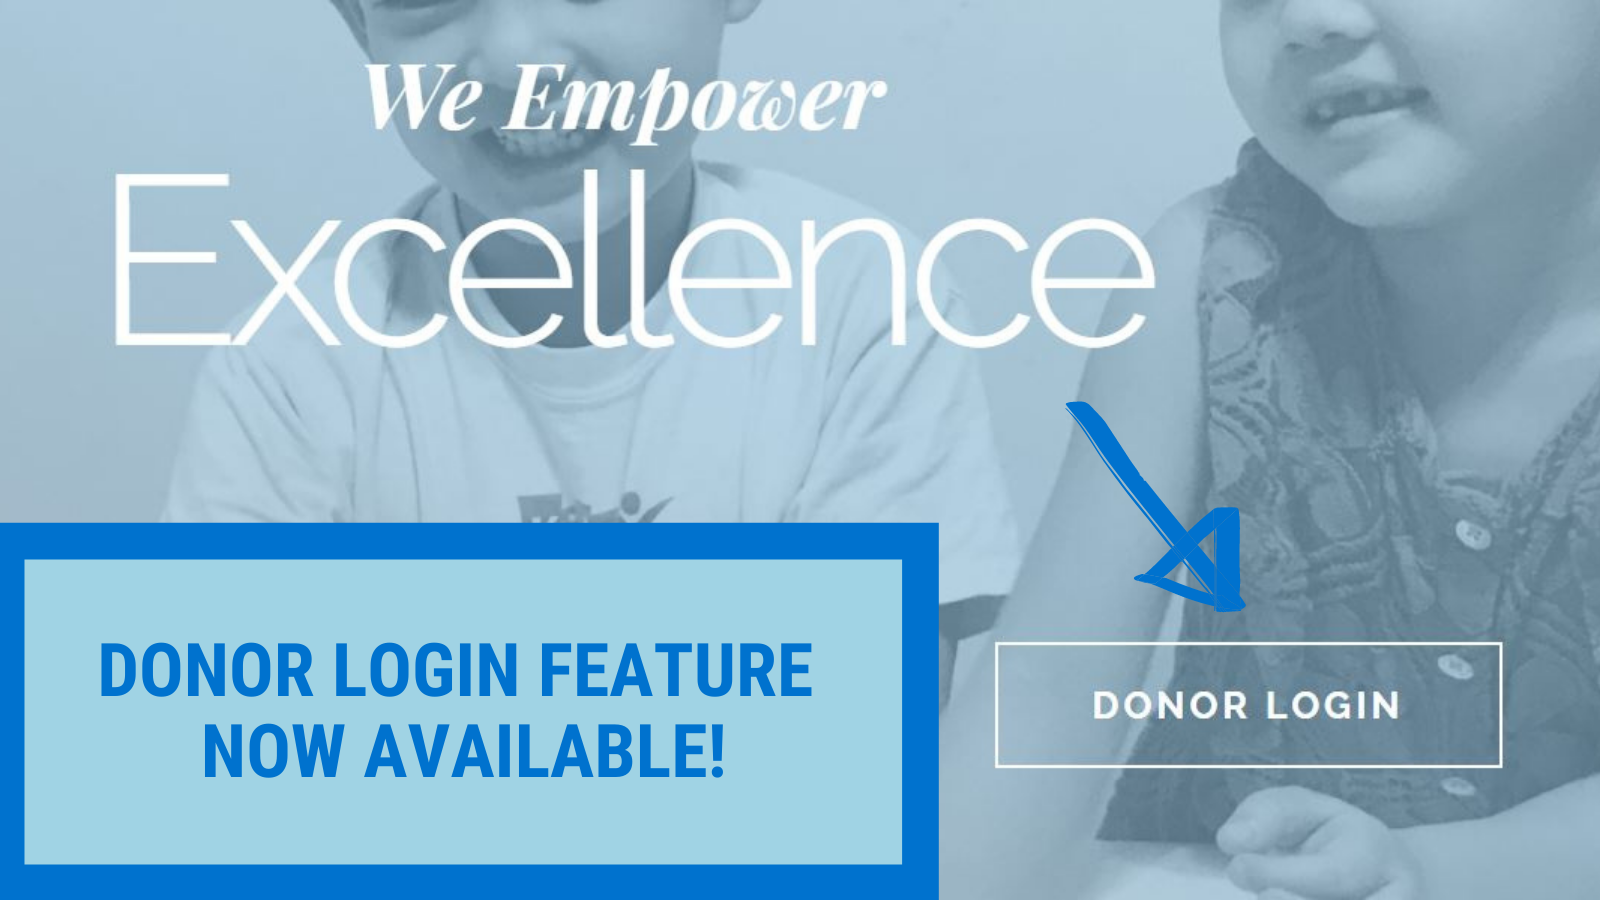 Donor Login Feature Now Available!